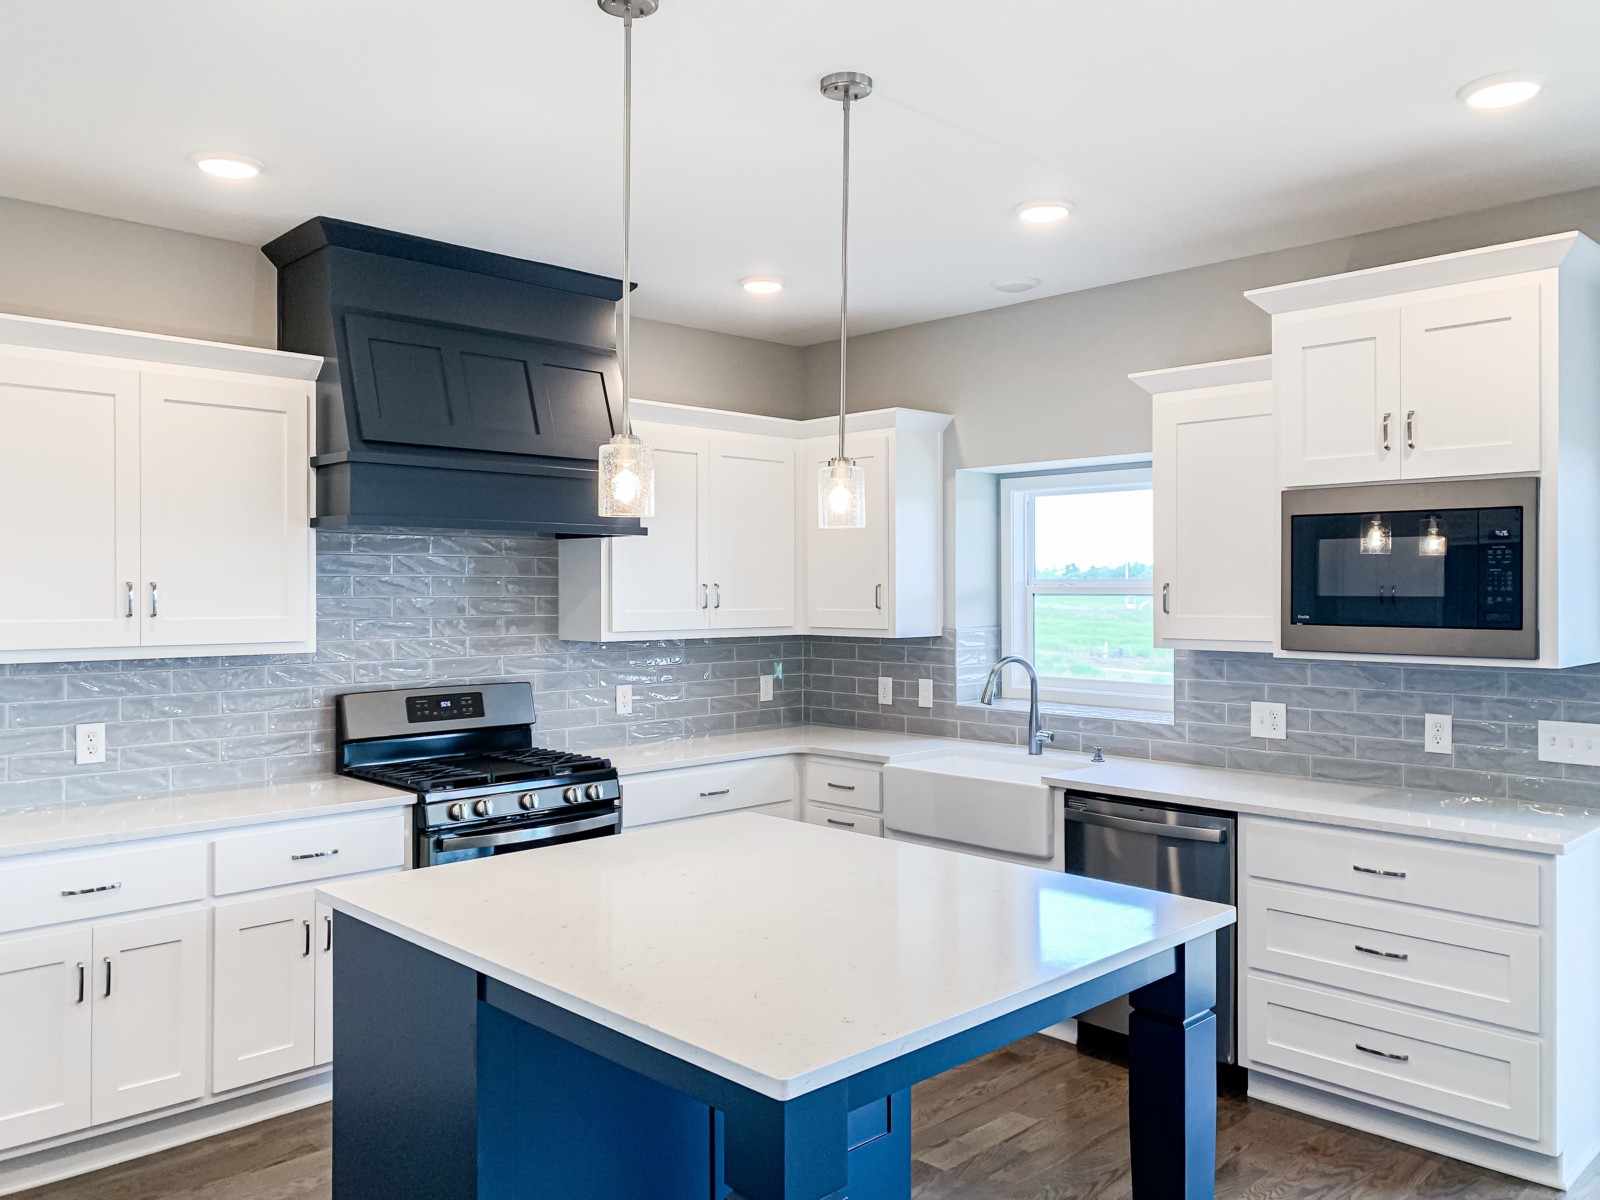 Kitchen Features You Should Consider When Building A New Home - Hearthside  Homes